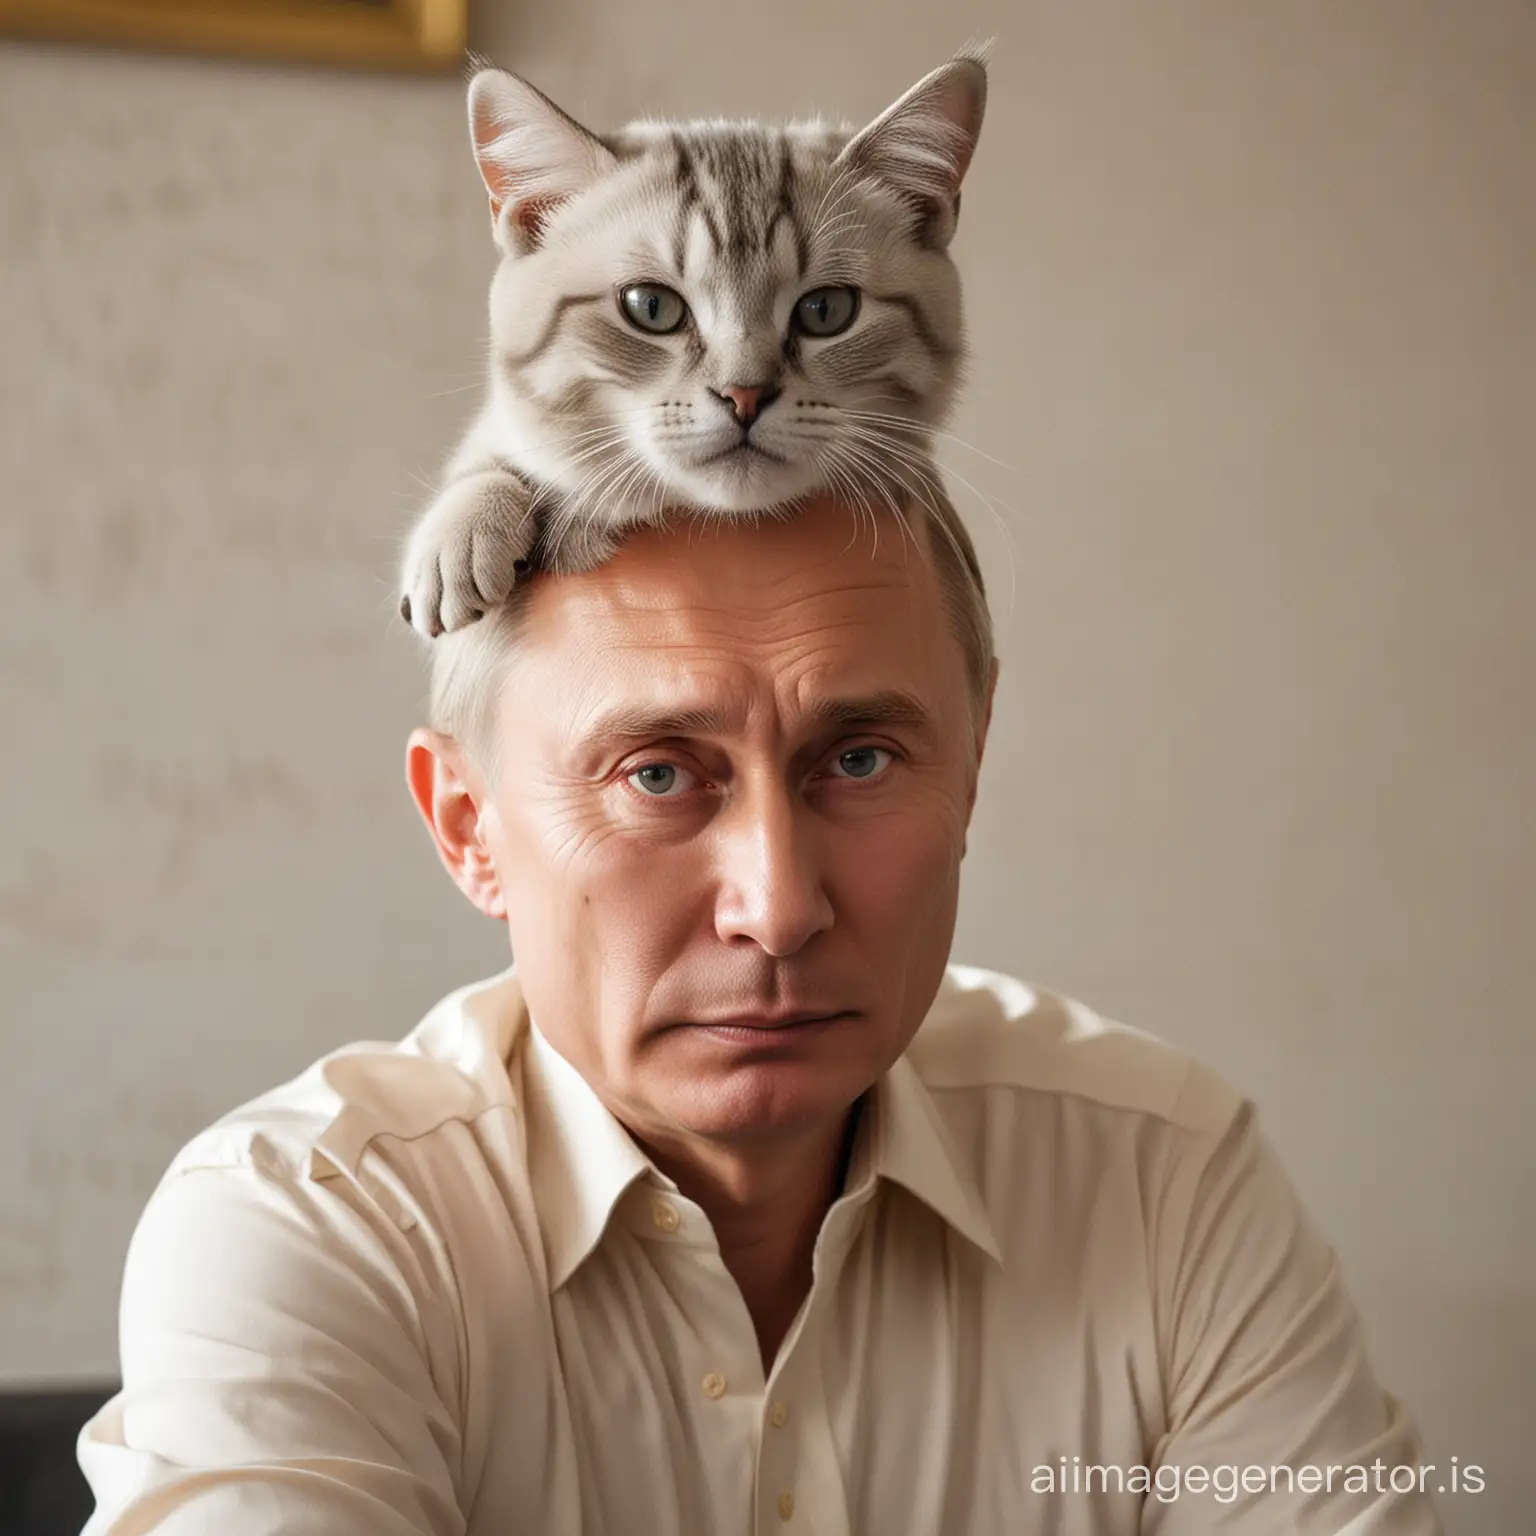 Vladimir-Putin-with-a-Serious-Expression-with-Cat-Perched-on-Head